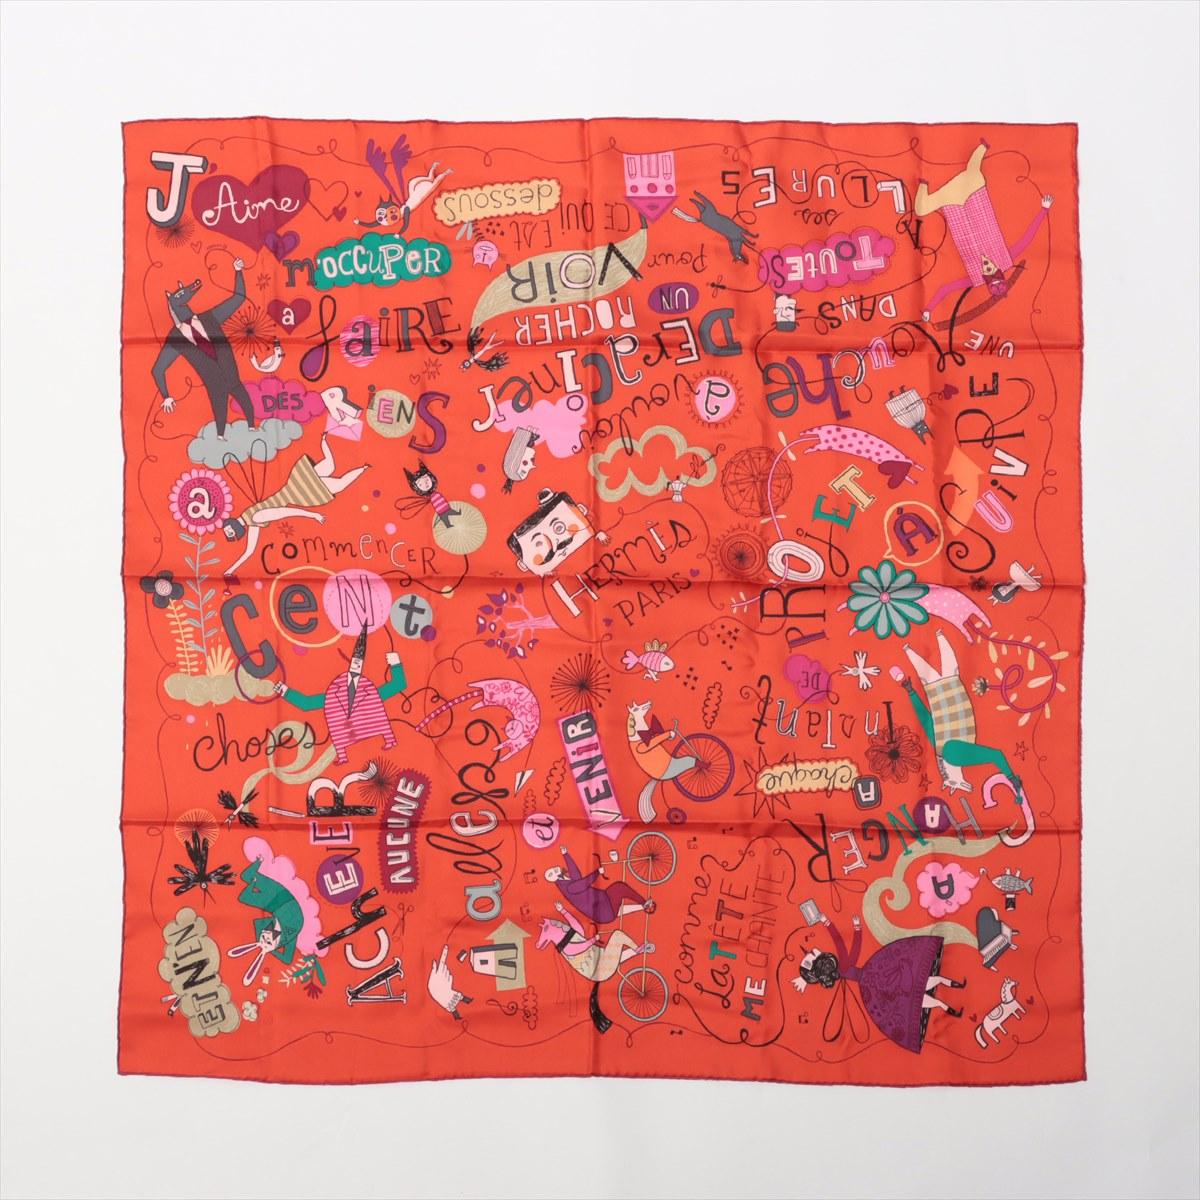 The Hermès Les Confessions Scarf in Silk Red is a luxurious and elegant accessory that exudes timeless sophistication. Crafted from fine silk twill, the scarf features a captivating design inspired by the theme of confessions, with intricate